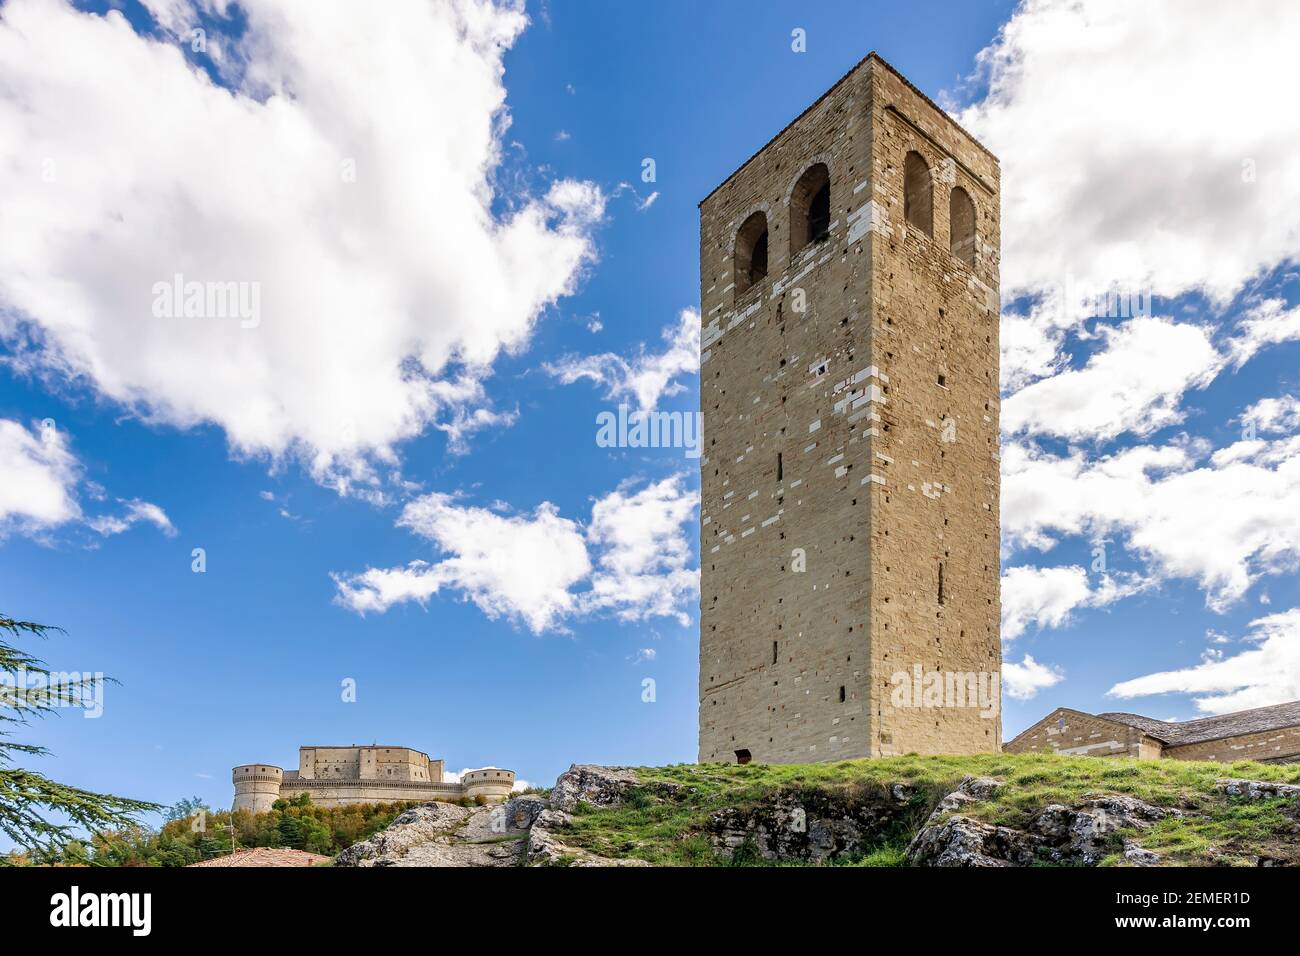 The Civic Tower of San Leo, Rimini, Italy, with the Fort of San Leo in the background Stock Photo